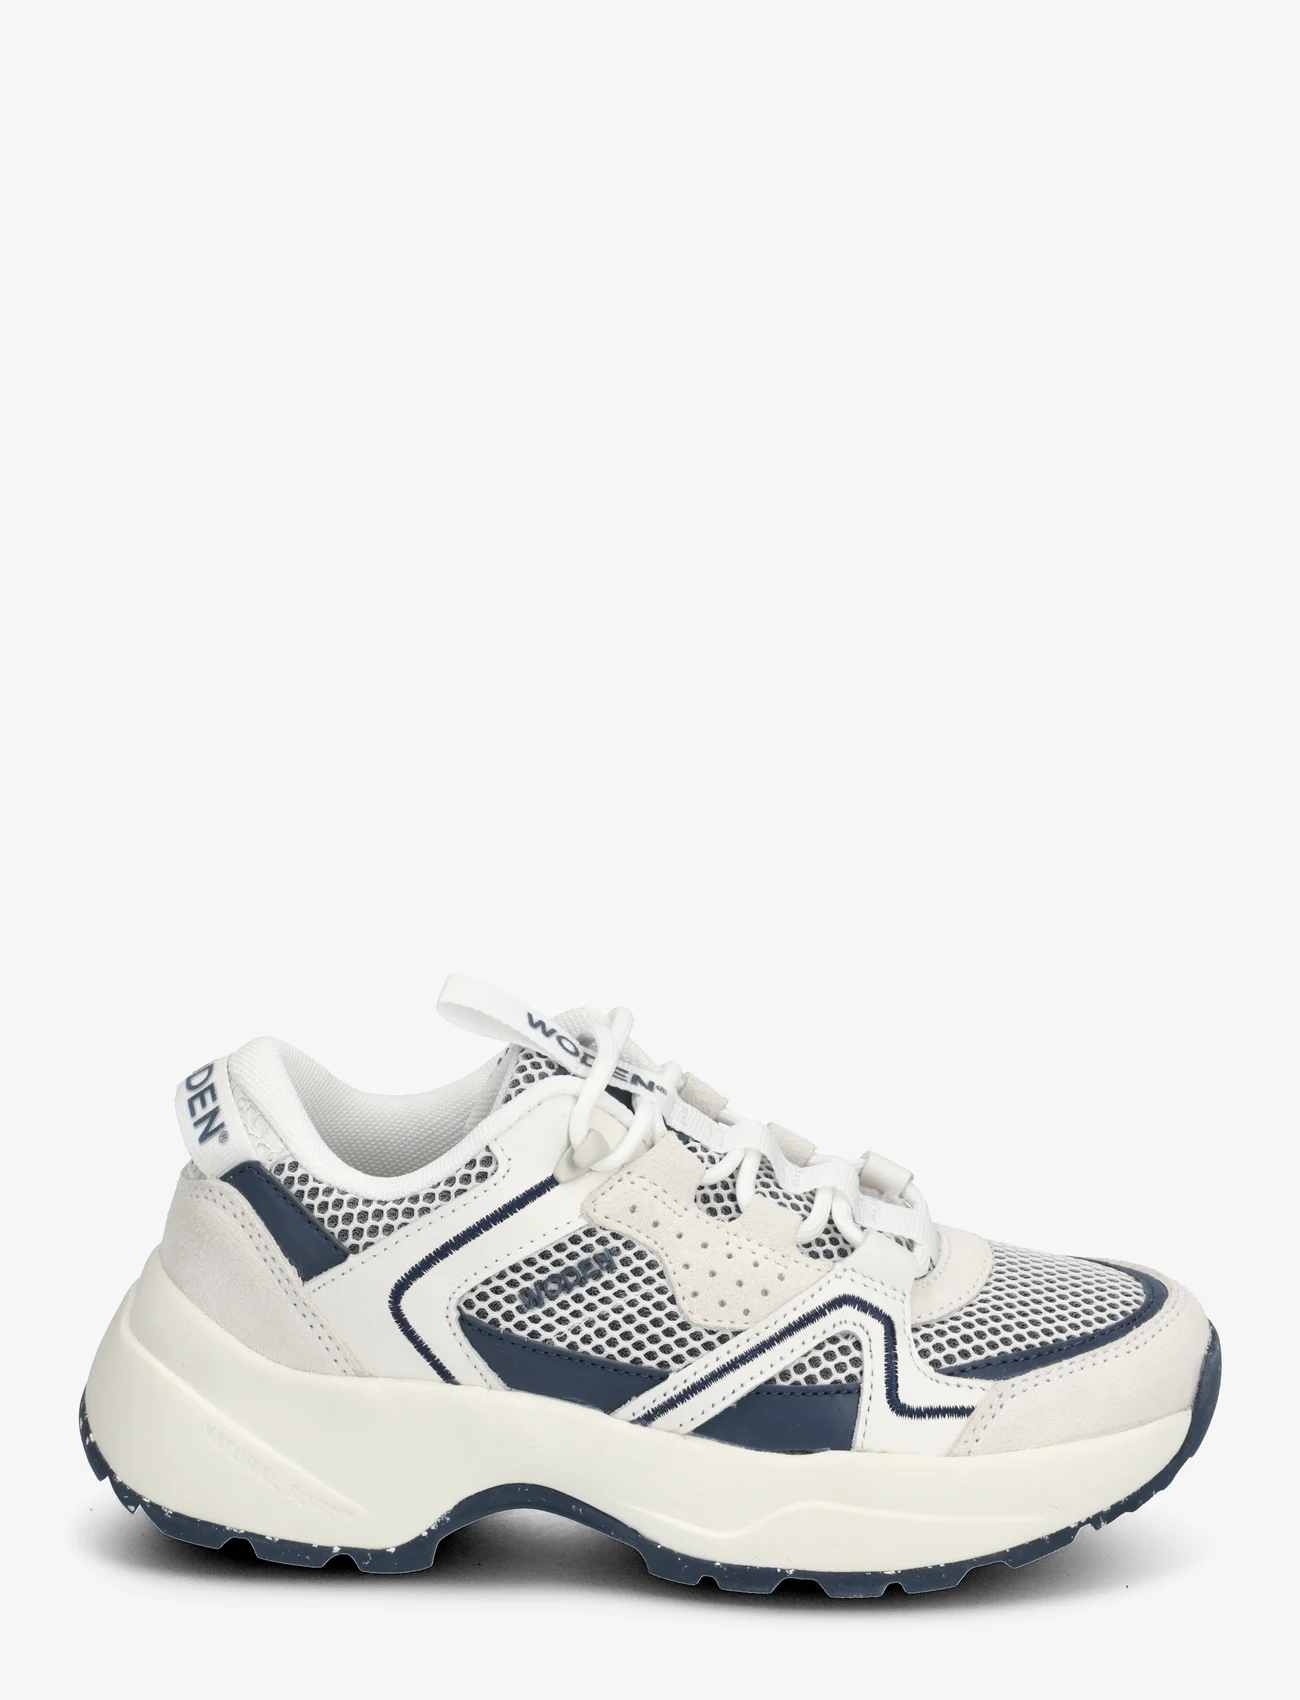 WODEN - Sif Open Mesh - lave sneakers - navy - 1